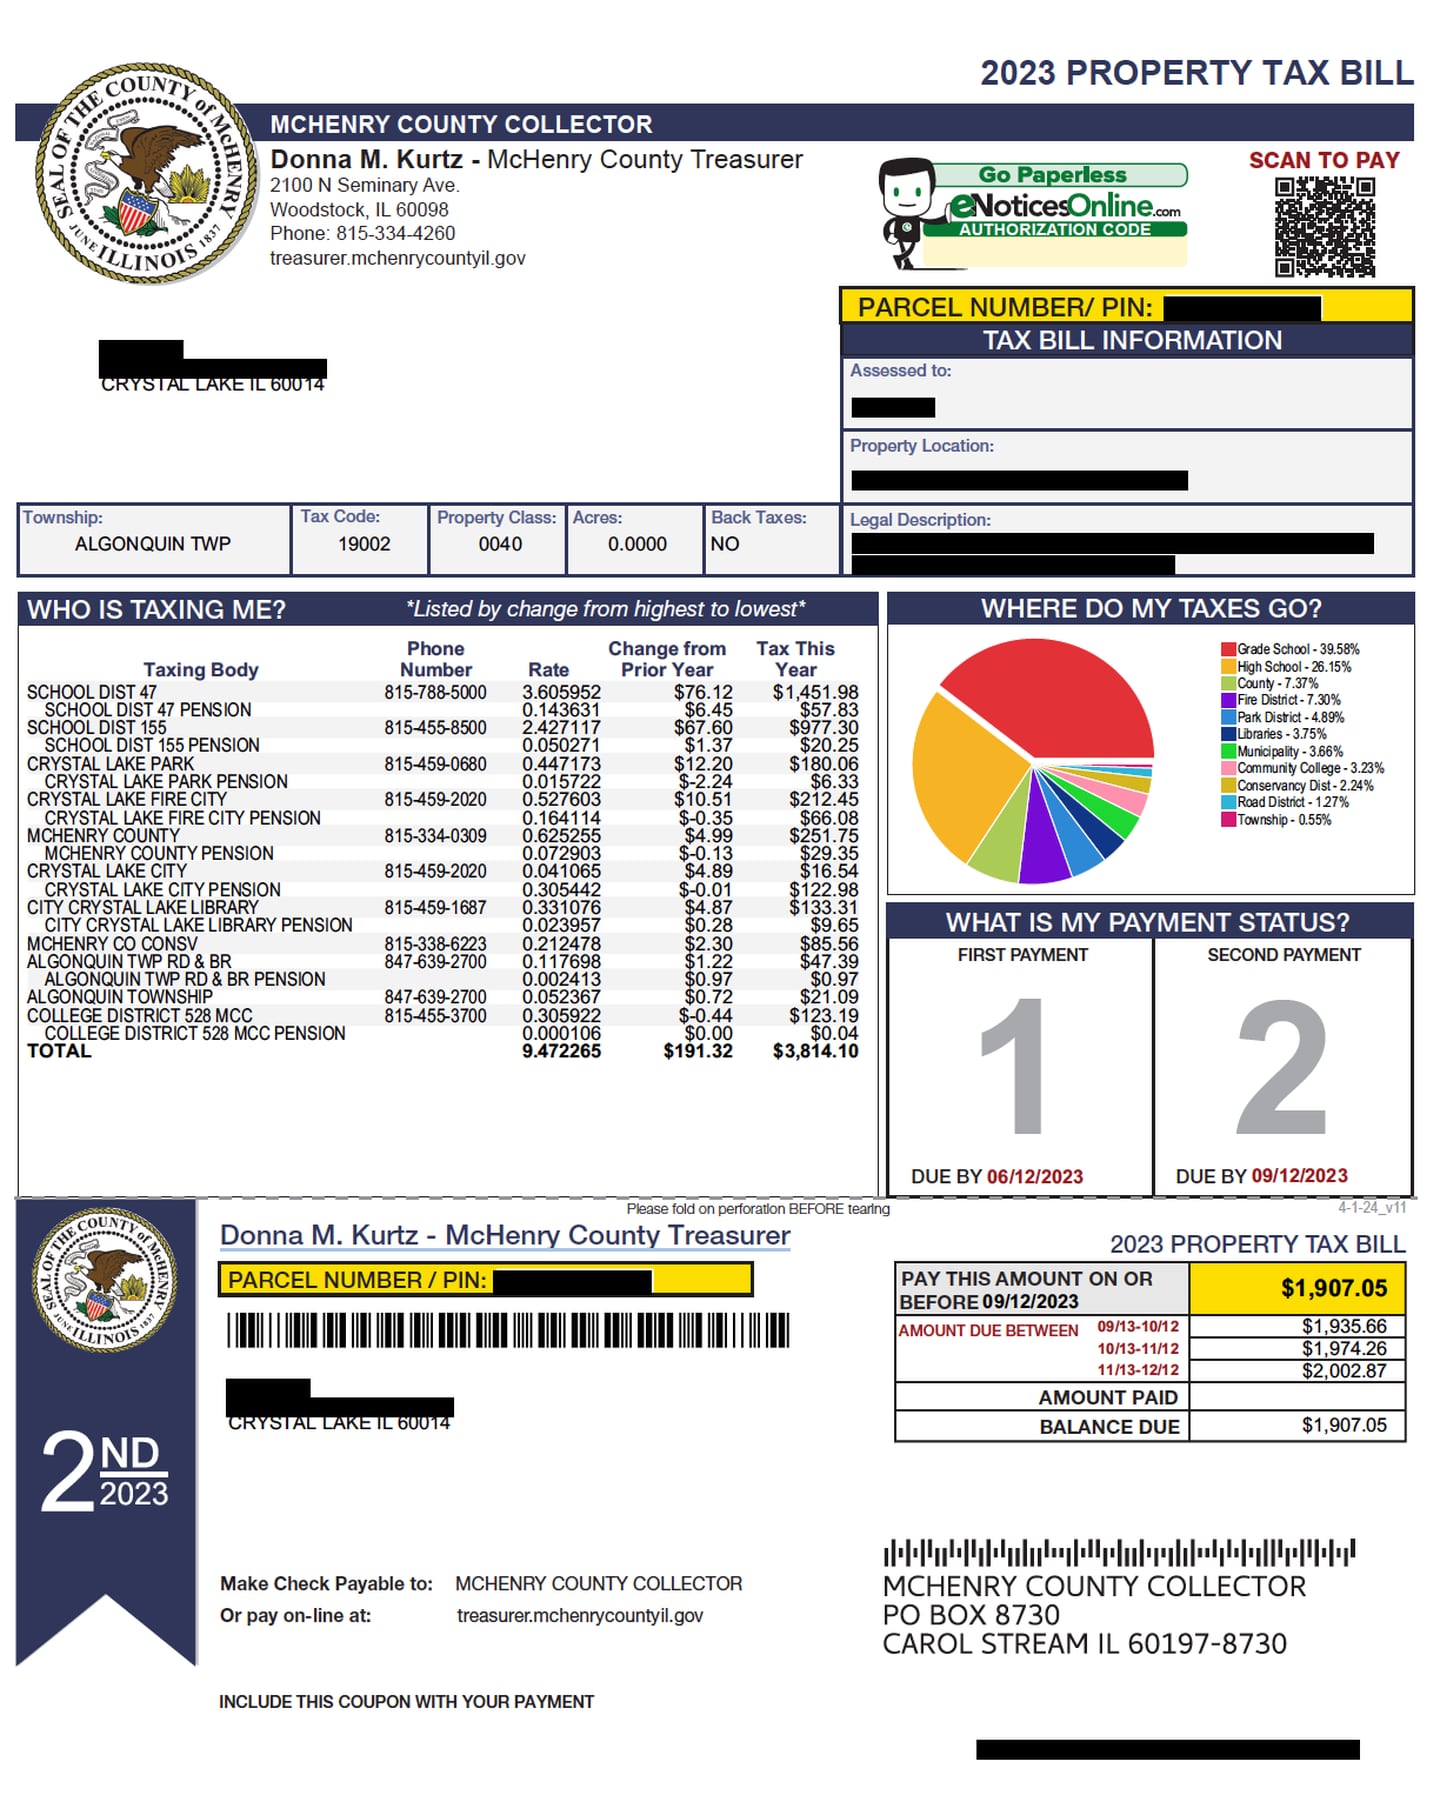 McHenry County debuted a new tax bill design for 2024.